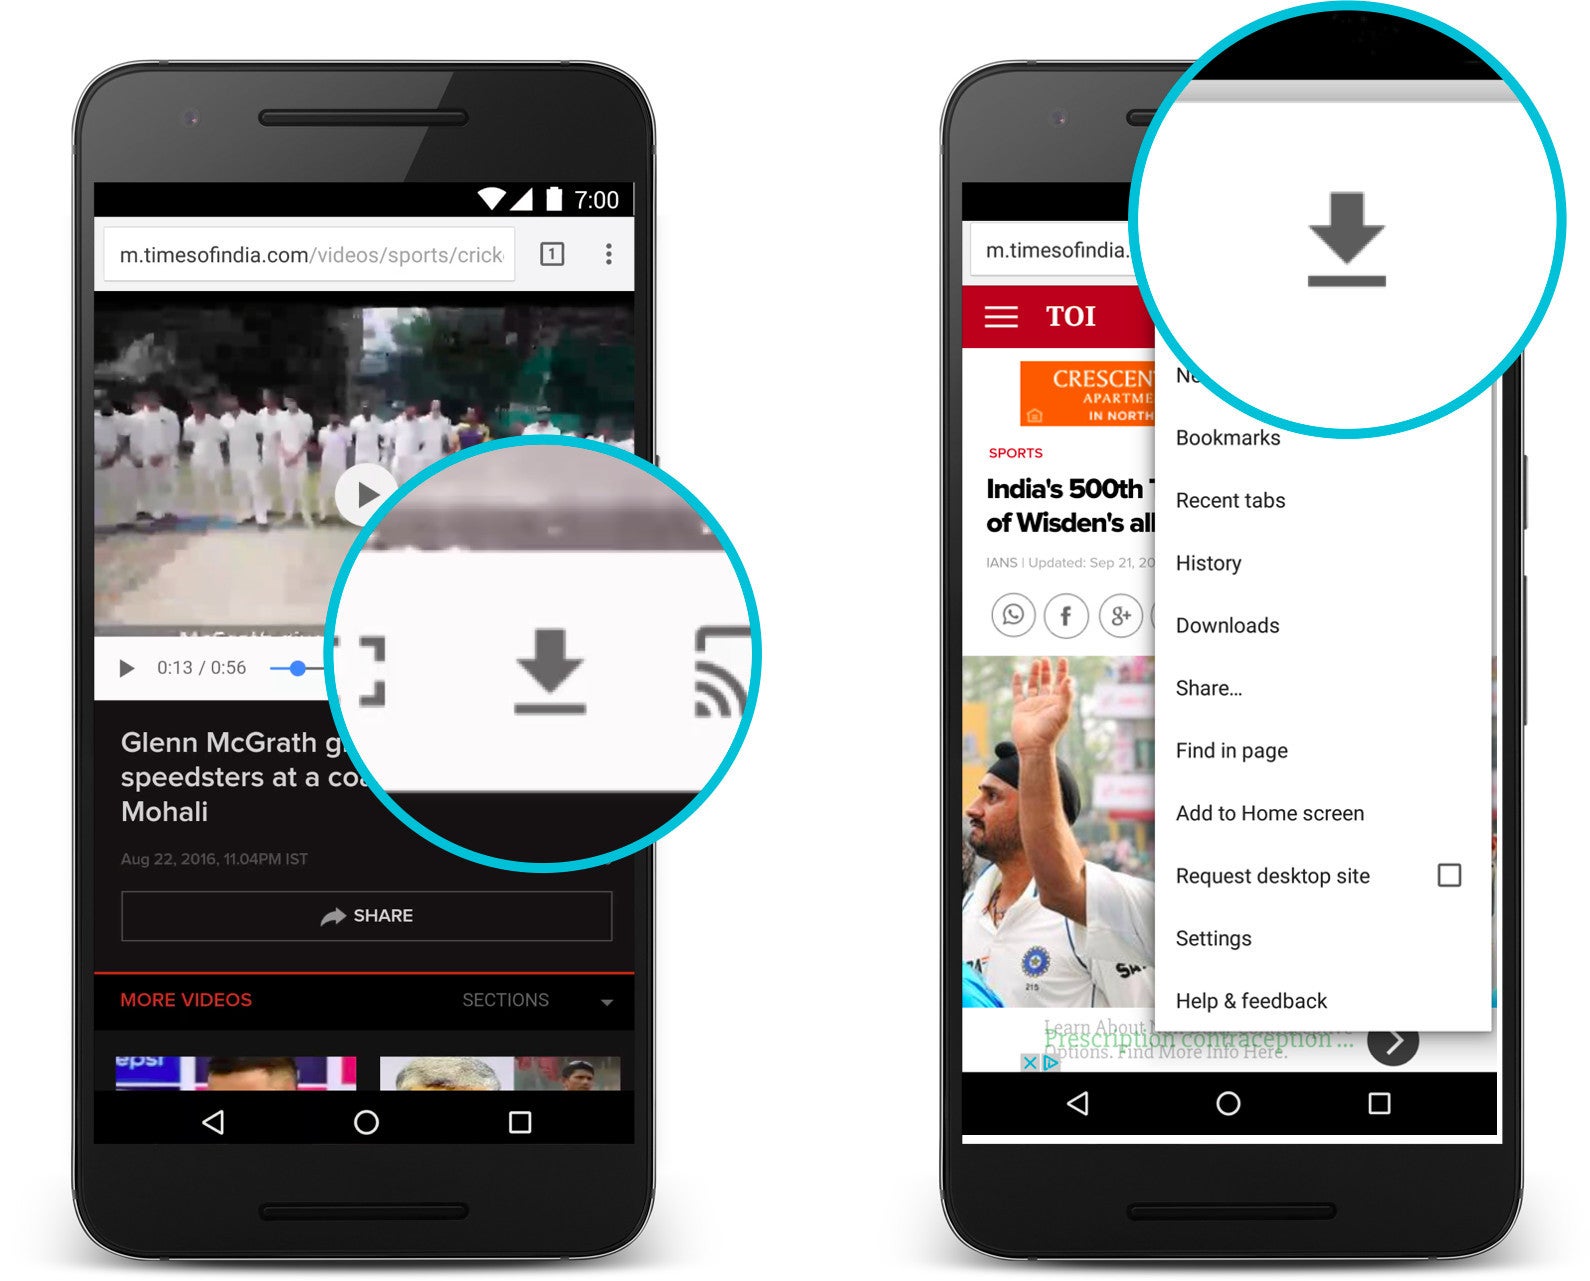 Chrome for Android gets new download feature, compression technology for videos